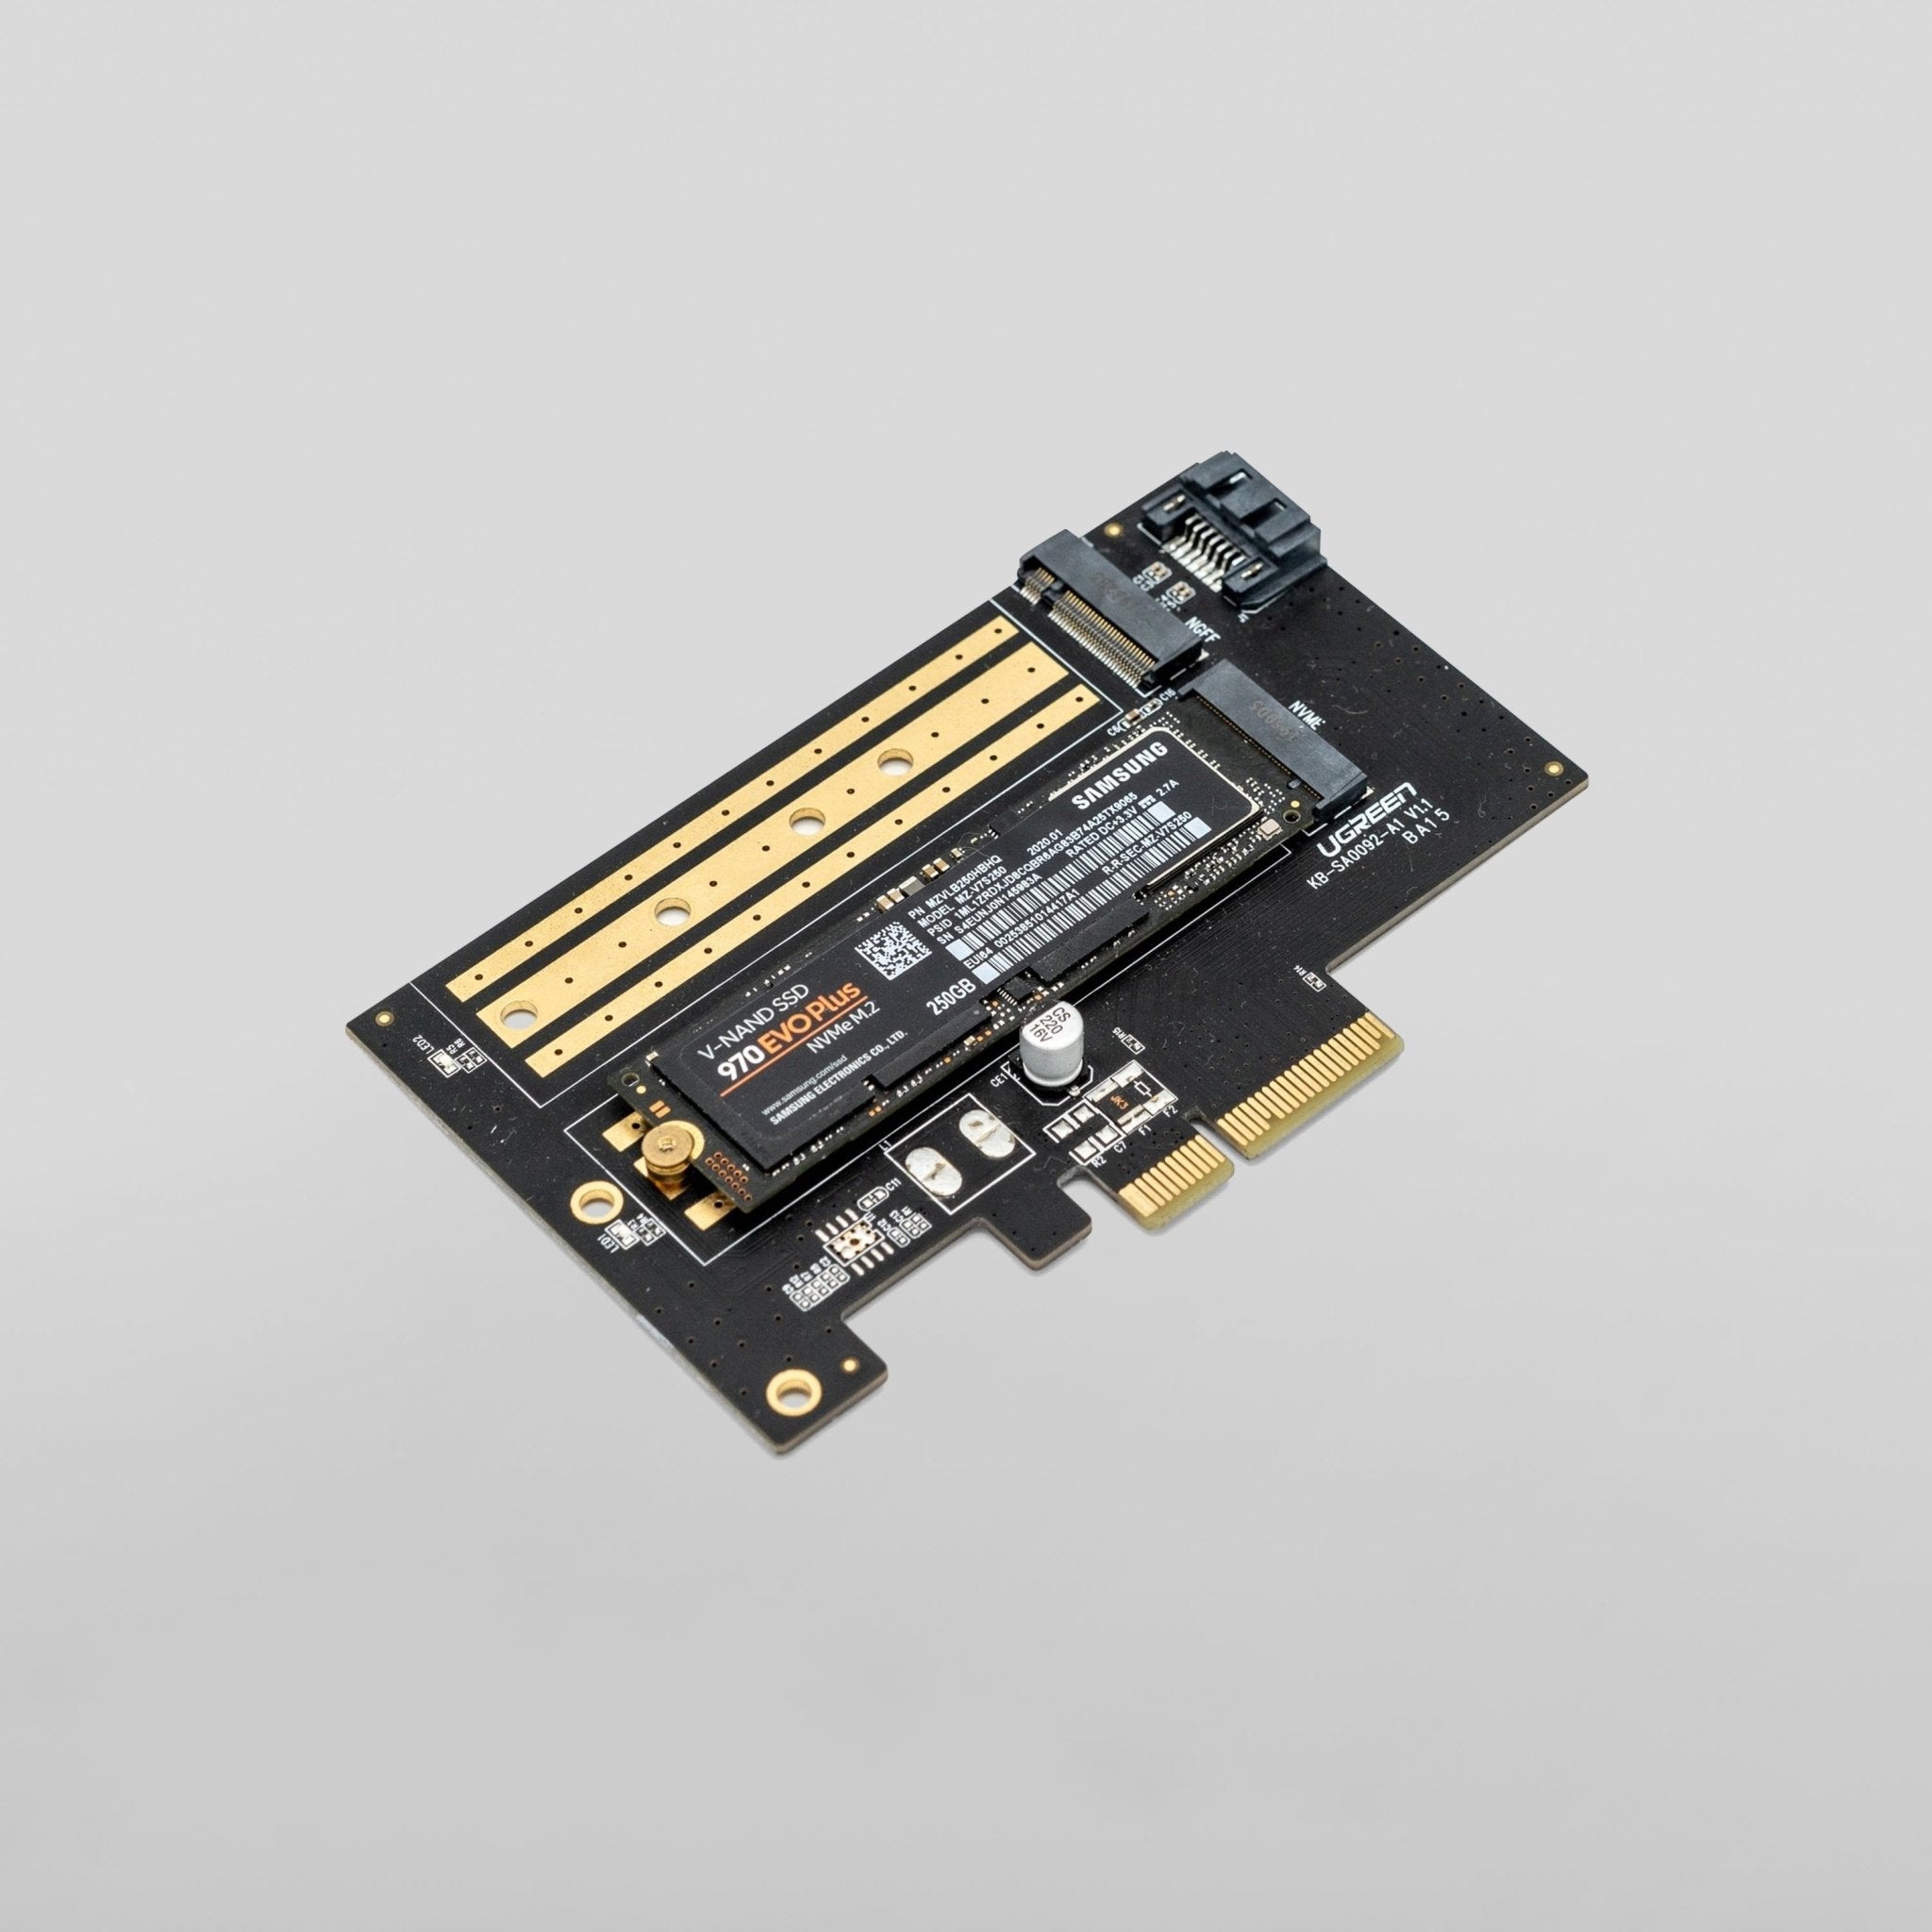 X1001 M.2 NVMe SSD Shield PCIe Peripheral Board compatible with